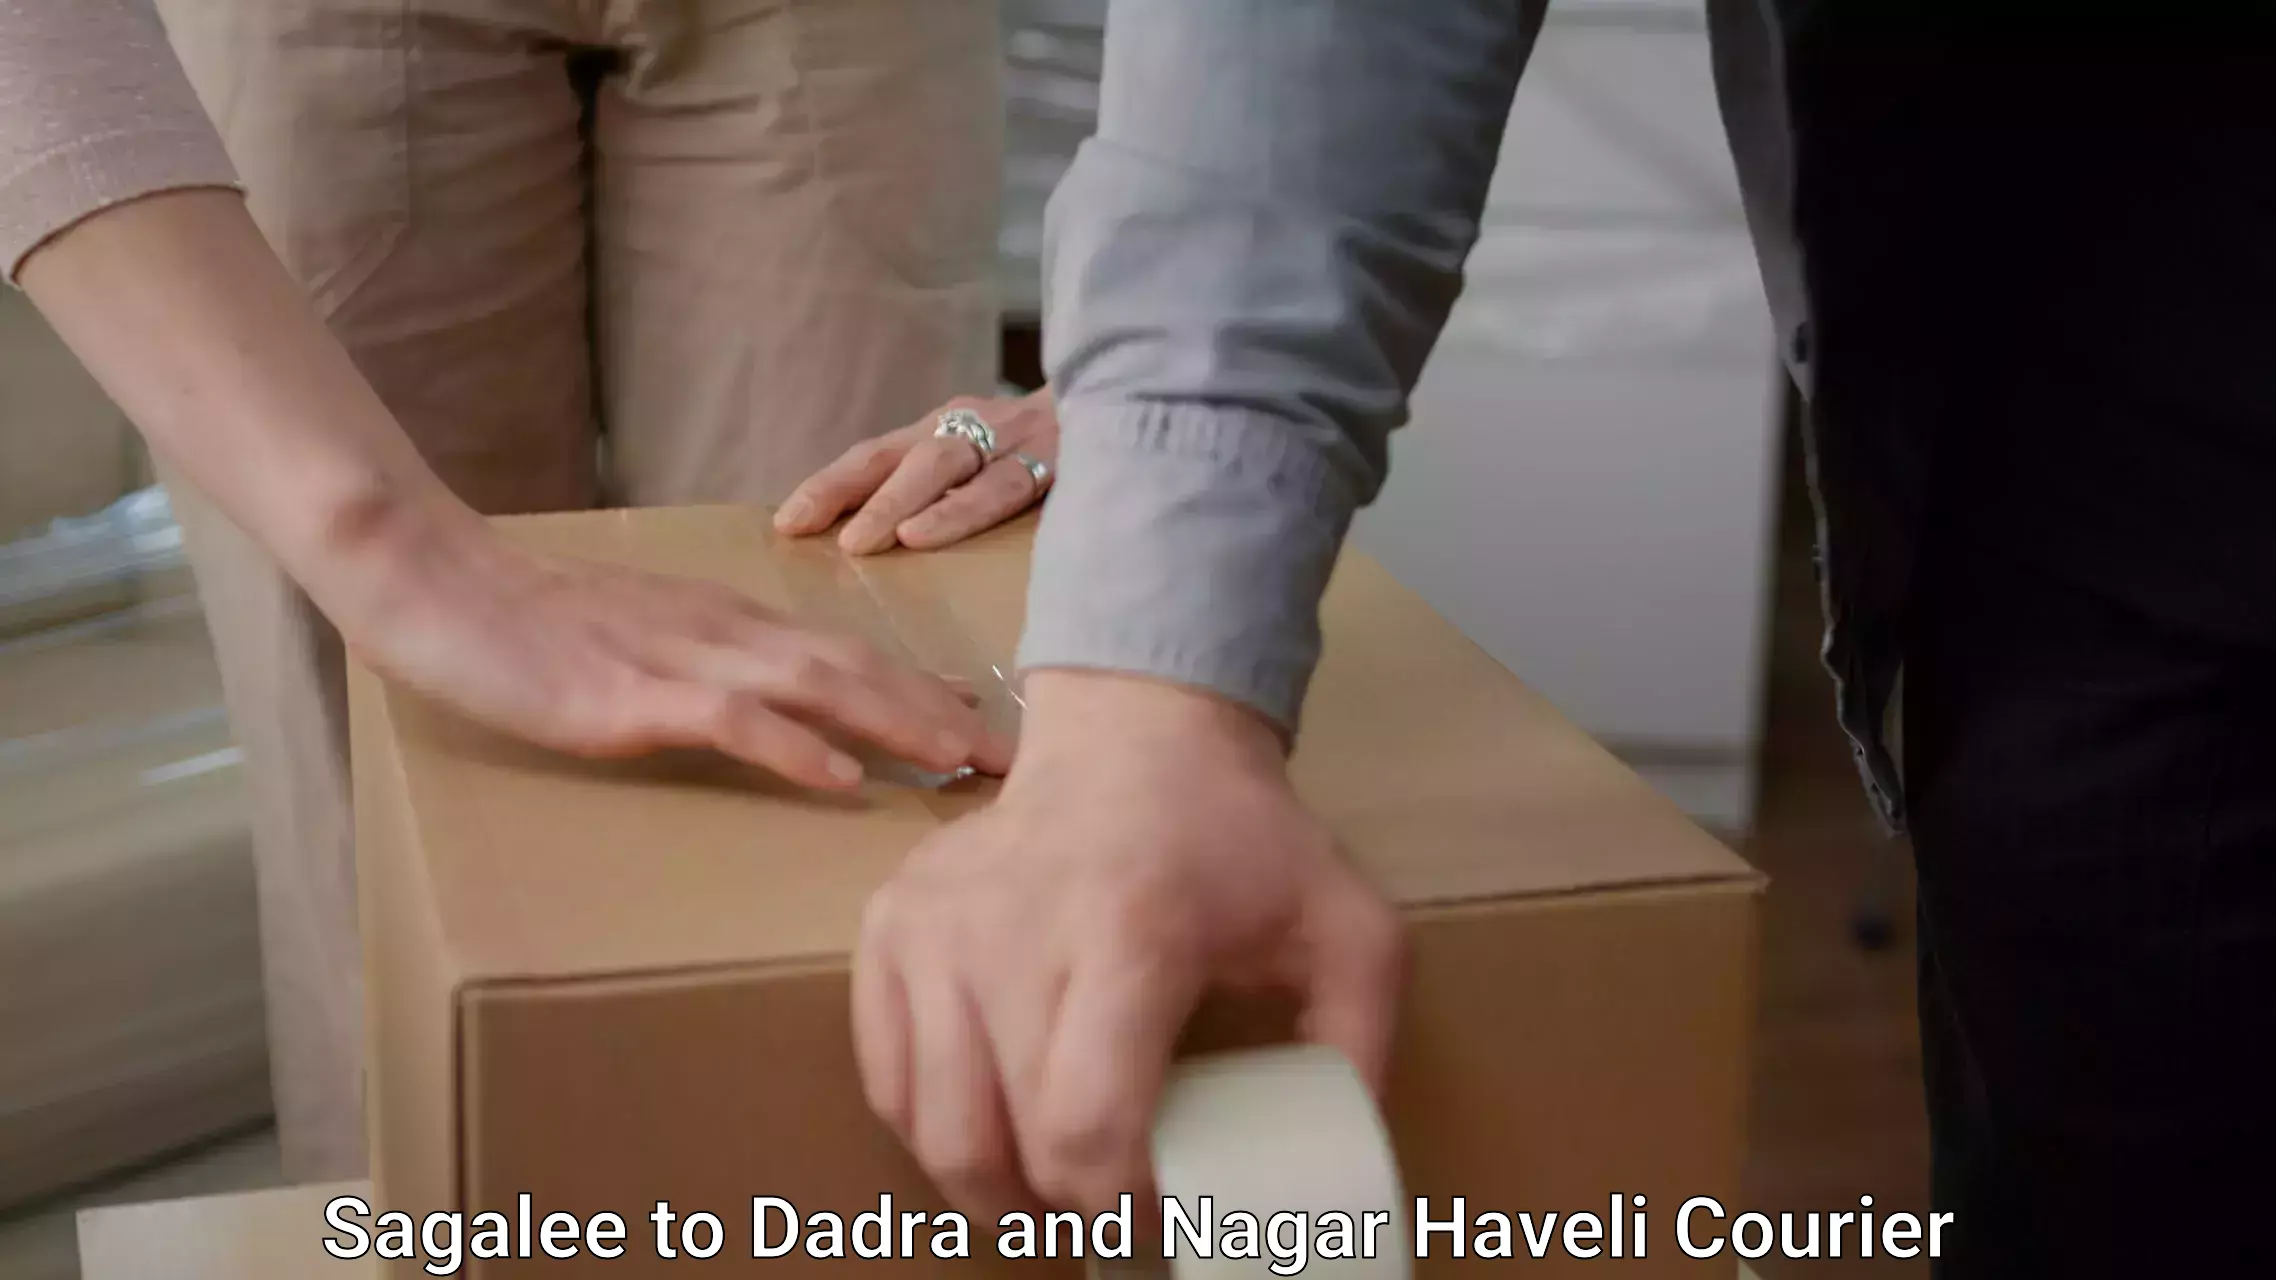 Furniture transport services in Sagalee to Dadra and Nagar Haveli